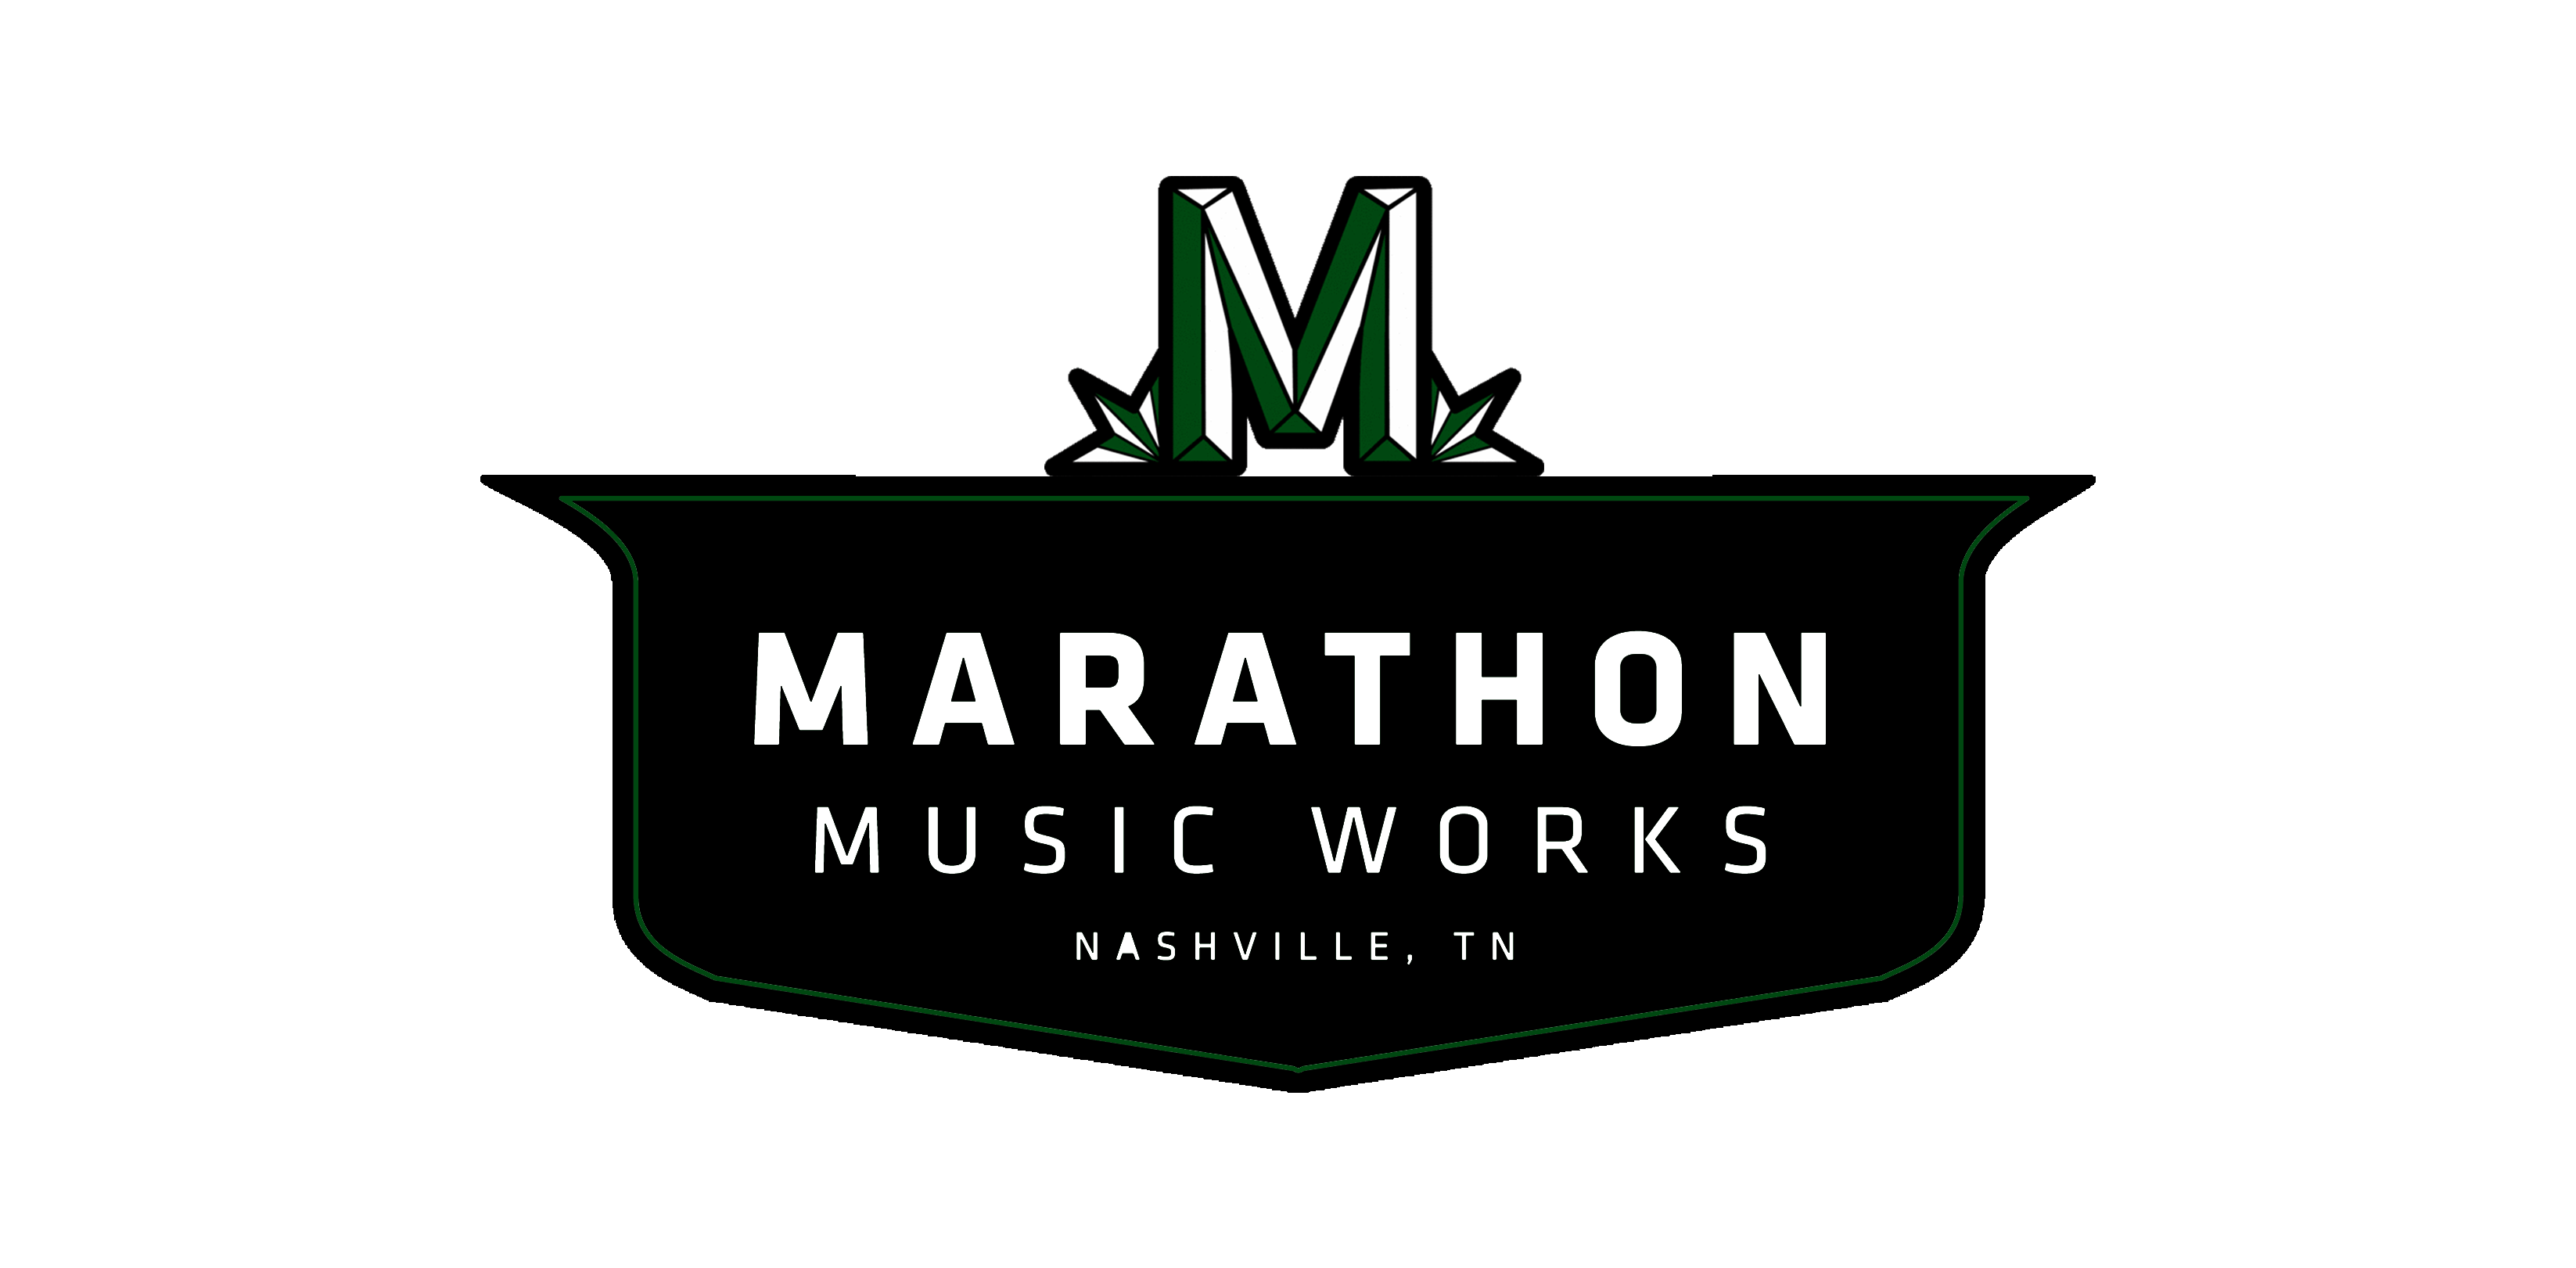 Marilyn Manson Official Logo - Marilyn Manson at Marathon Music Works Official Ticket Exchange | Lyte